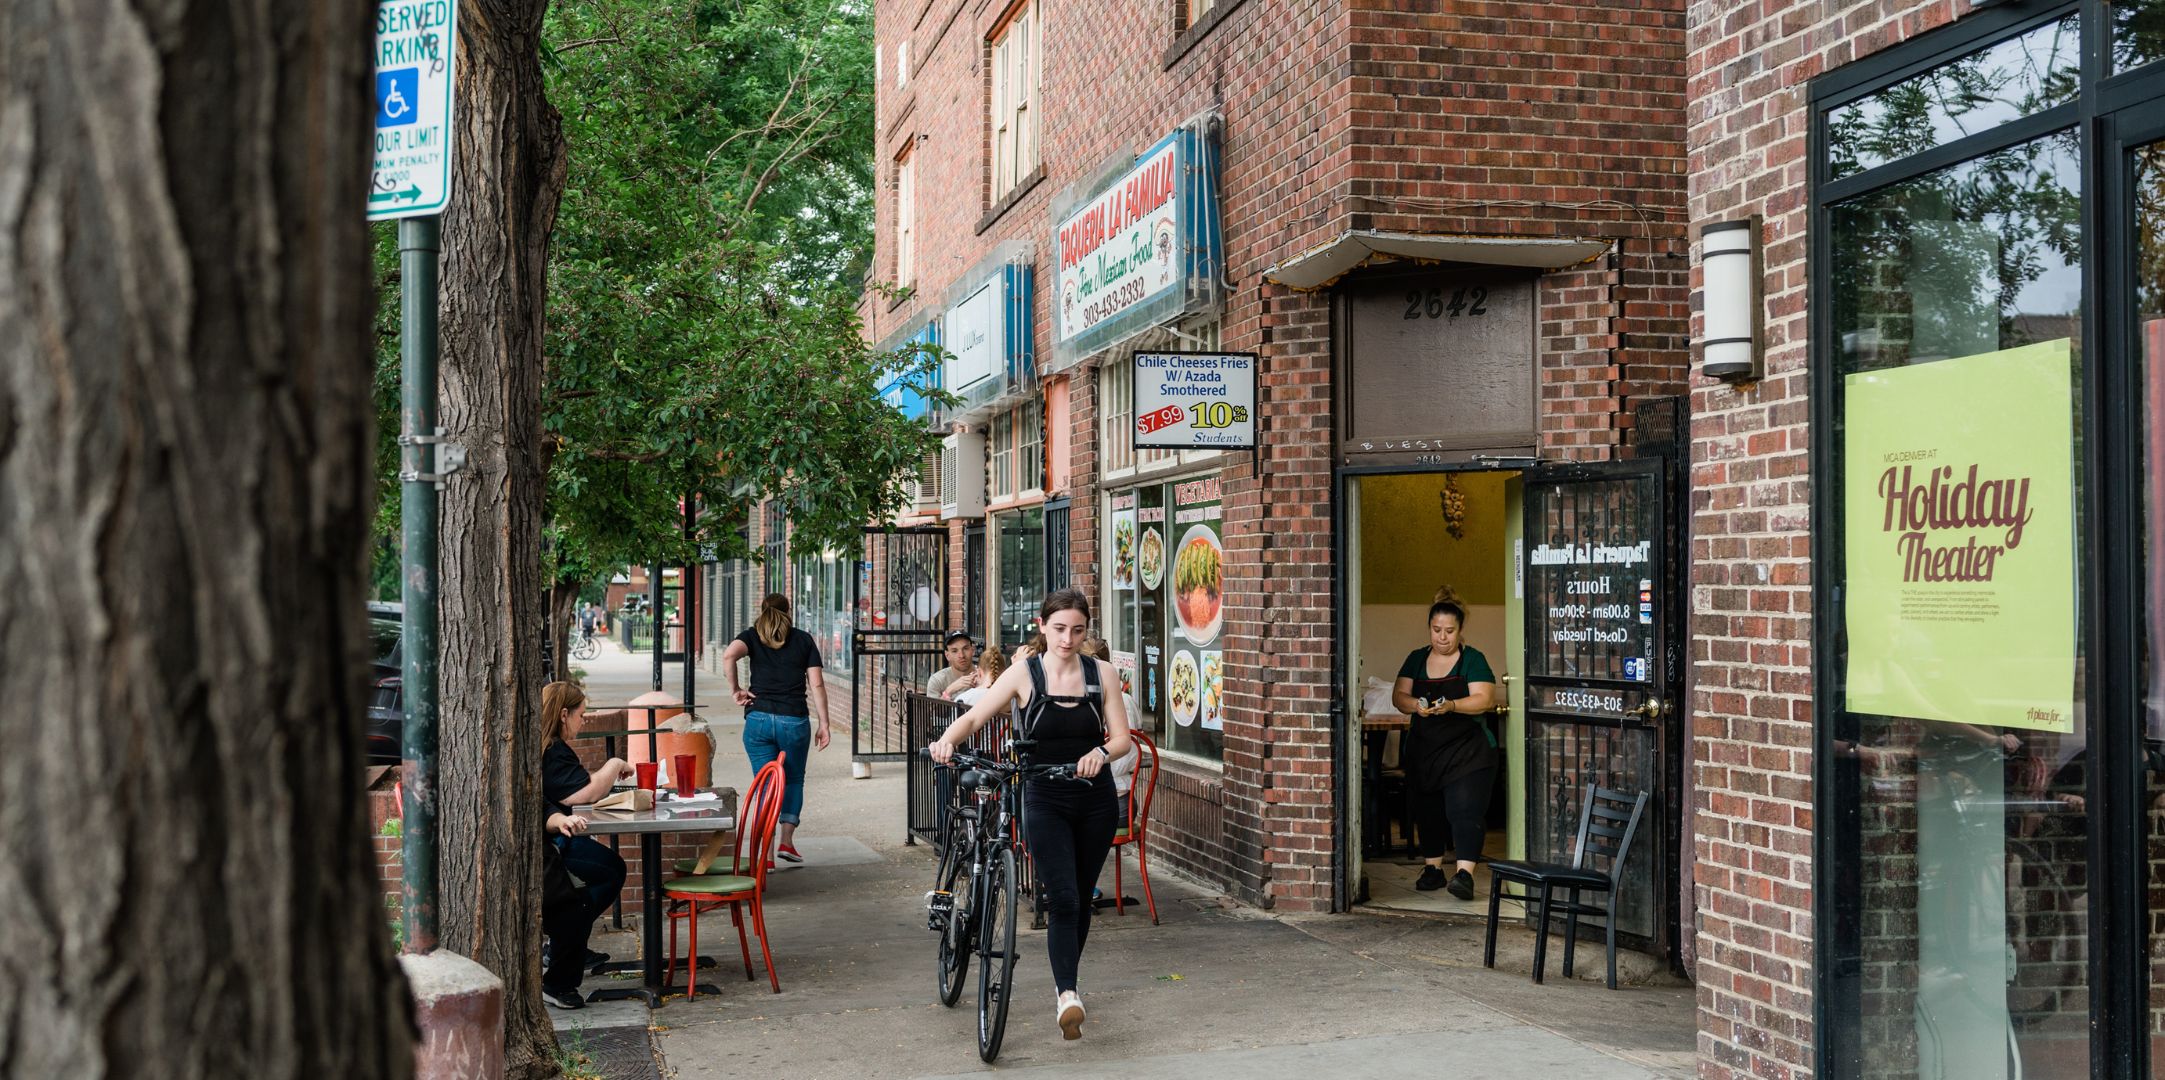 Person walking their bike on a sidewalk near a brick building. There are storefronts lined up along the sidewalk, and people sitting at tables outside one of the restaurants in view.